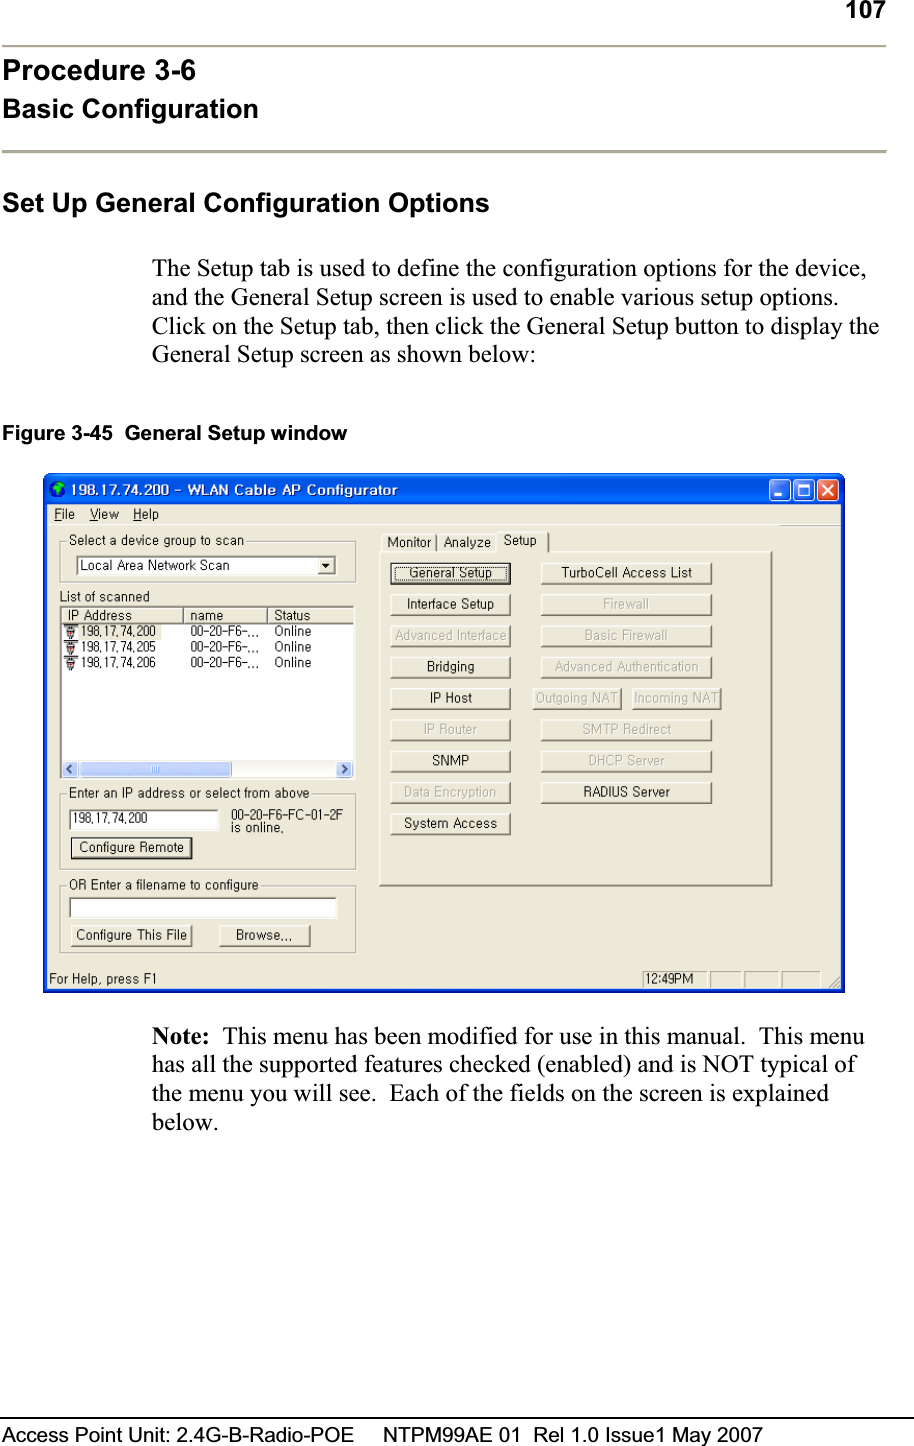 107Access Point Unit: 2.4G-B-Radio-POE     NTPM99AE 01  Rel 1.0 Issue1 May 2007 Procedure 3-6 Basic Configuration Set Up General Configuration Options The Setup tab is used to define the configuration options for the device, and the General Setup screen is used to enable various setup options.Click on the Setup tab, then click the General Setup button to display the General Setup screen as shown below: Figure 3-45  General Setup window Note:  This menu has been modified for use in this manual.  This menu has all the supported features checked (enabled) and is NOT typical of the menu you will see.  Each of the fields on the screen is explained below.